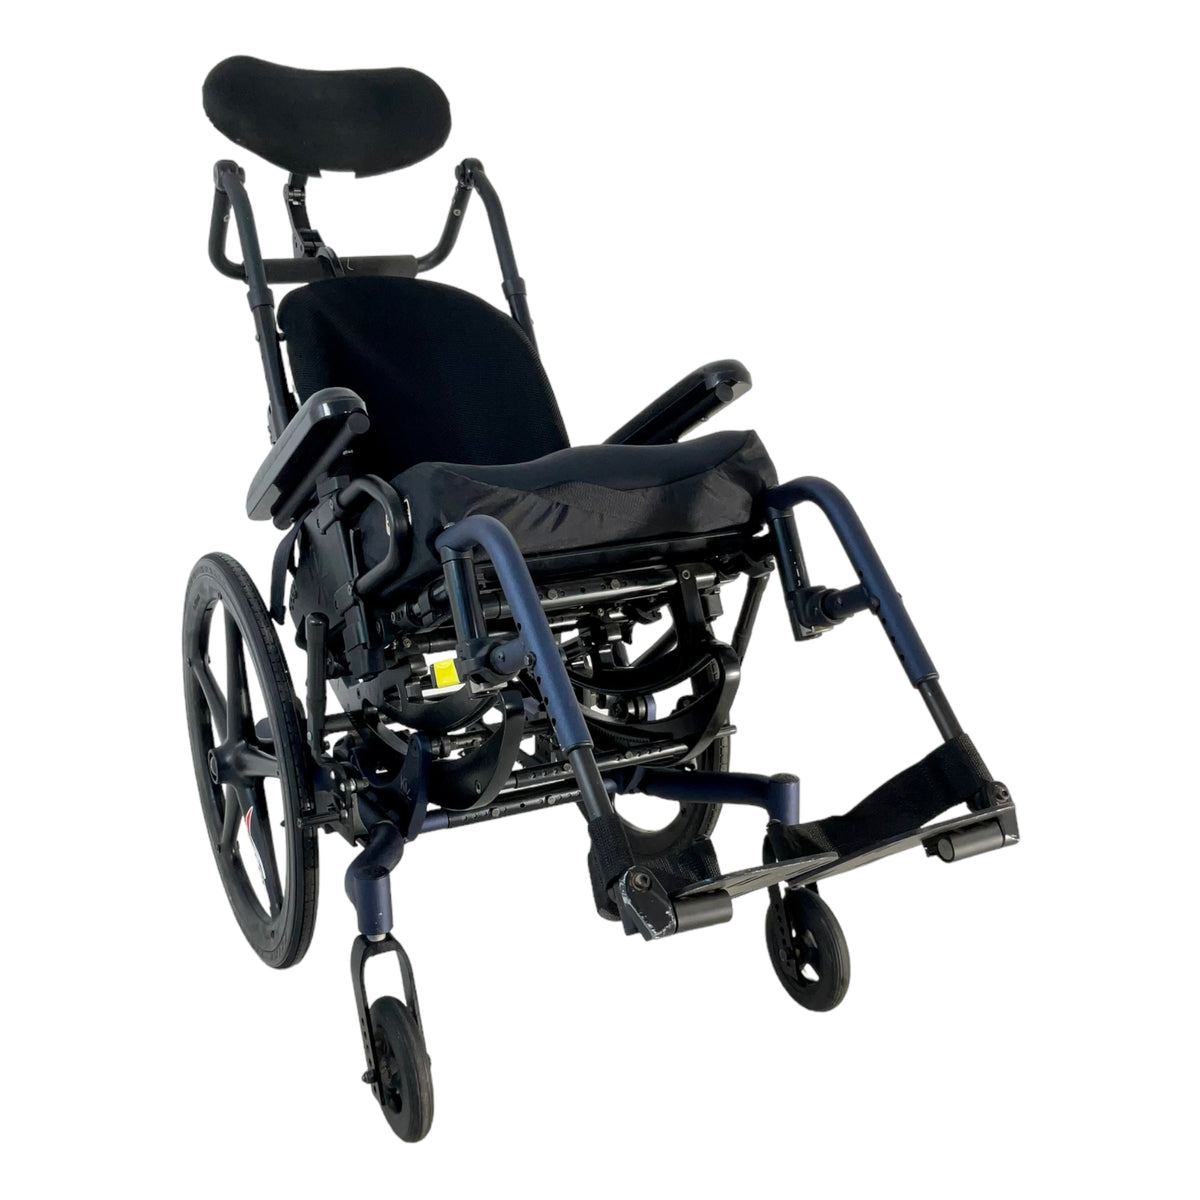 Find Comfort of any Level with the Ki Mobility Focus CR Tilt-in-Space!